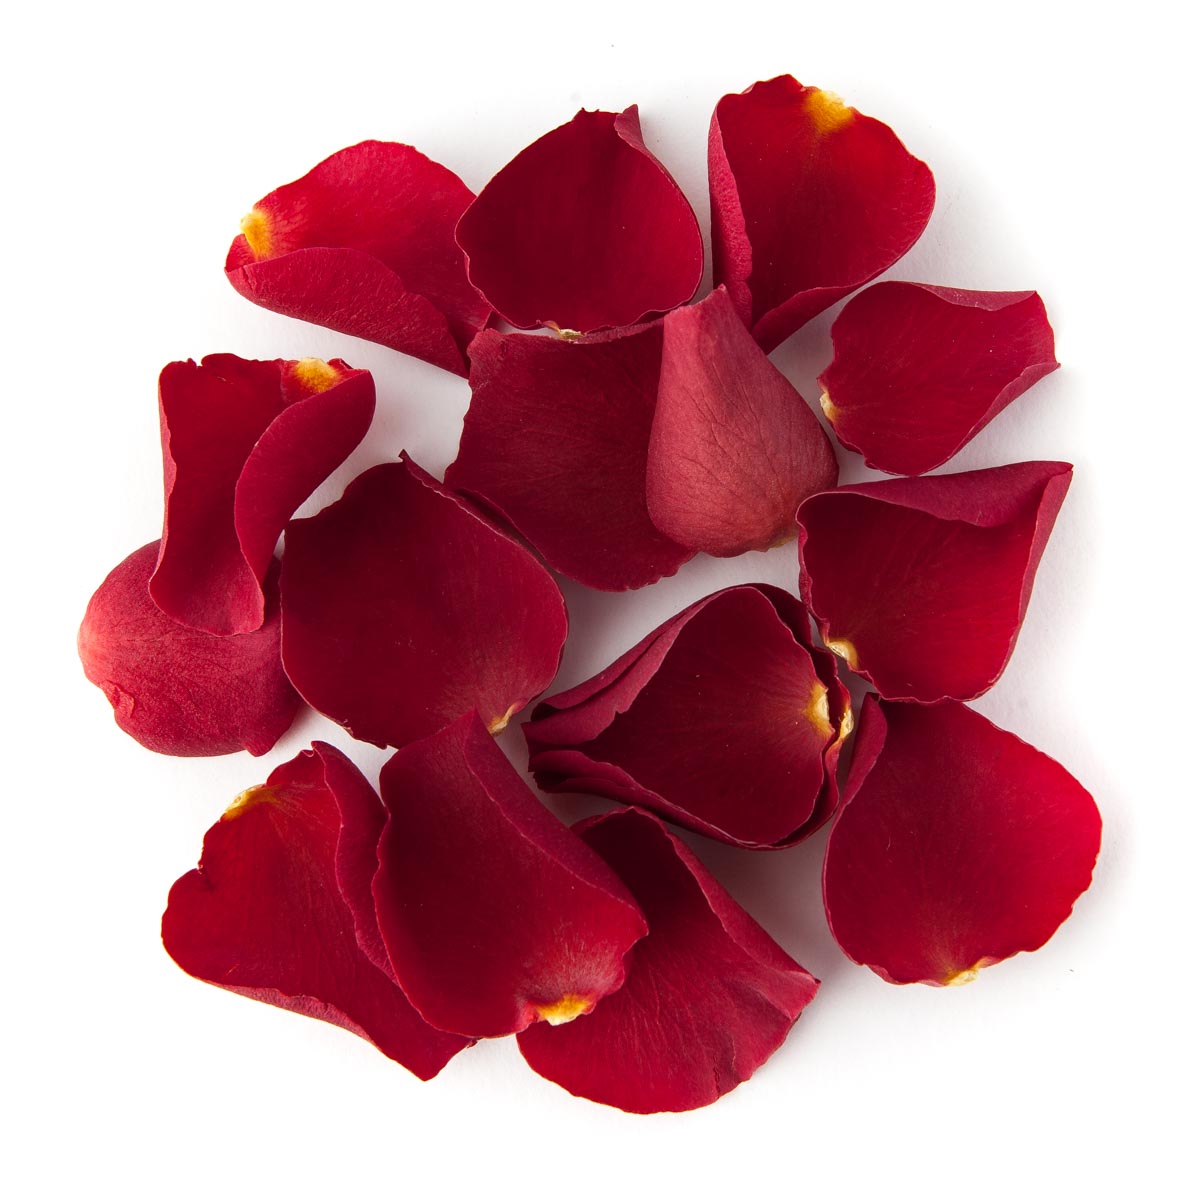 Red Rose Petals for St Valentine's Day - The Confetti Blog